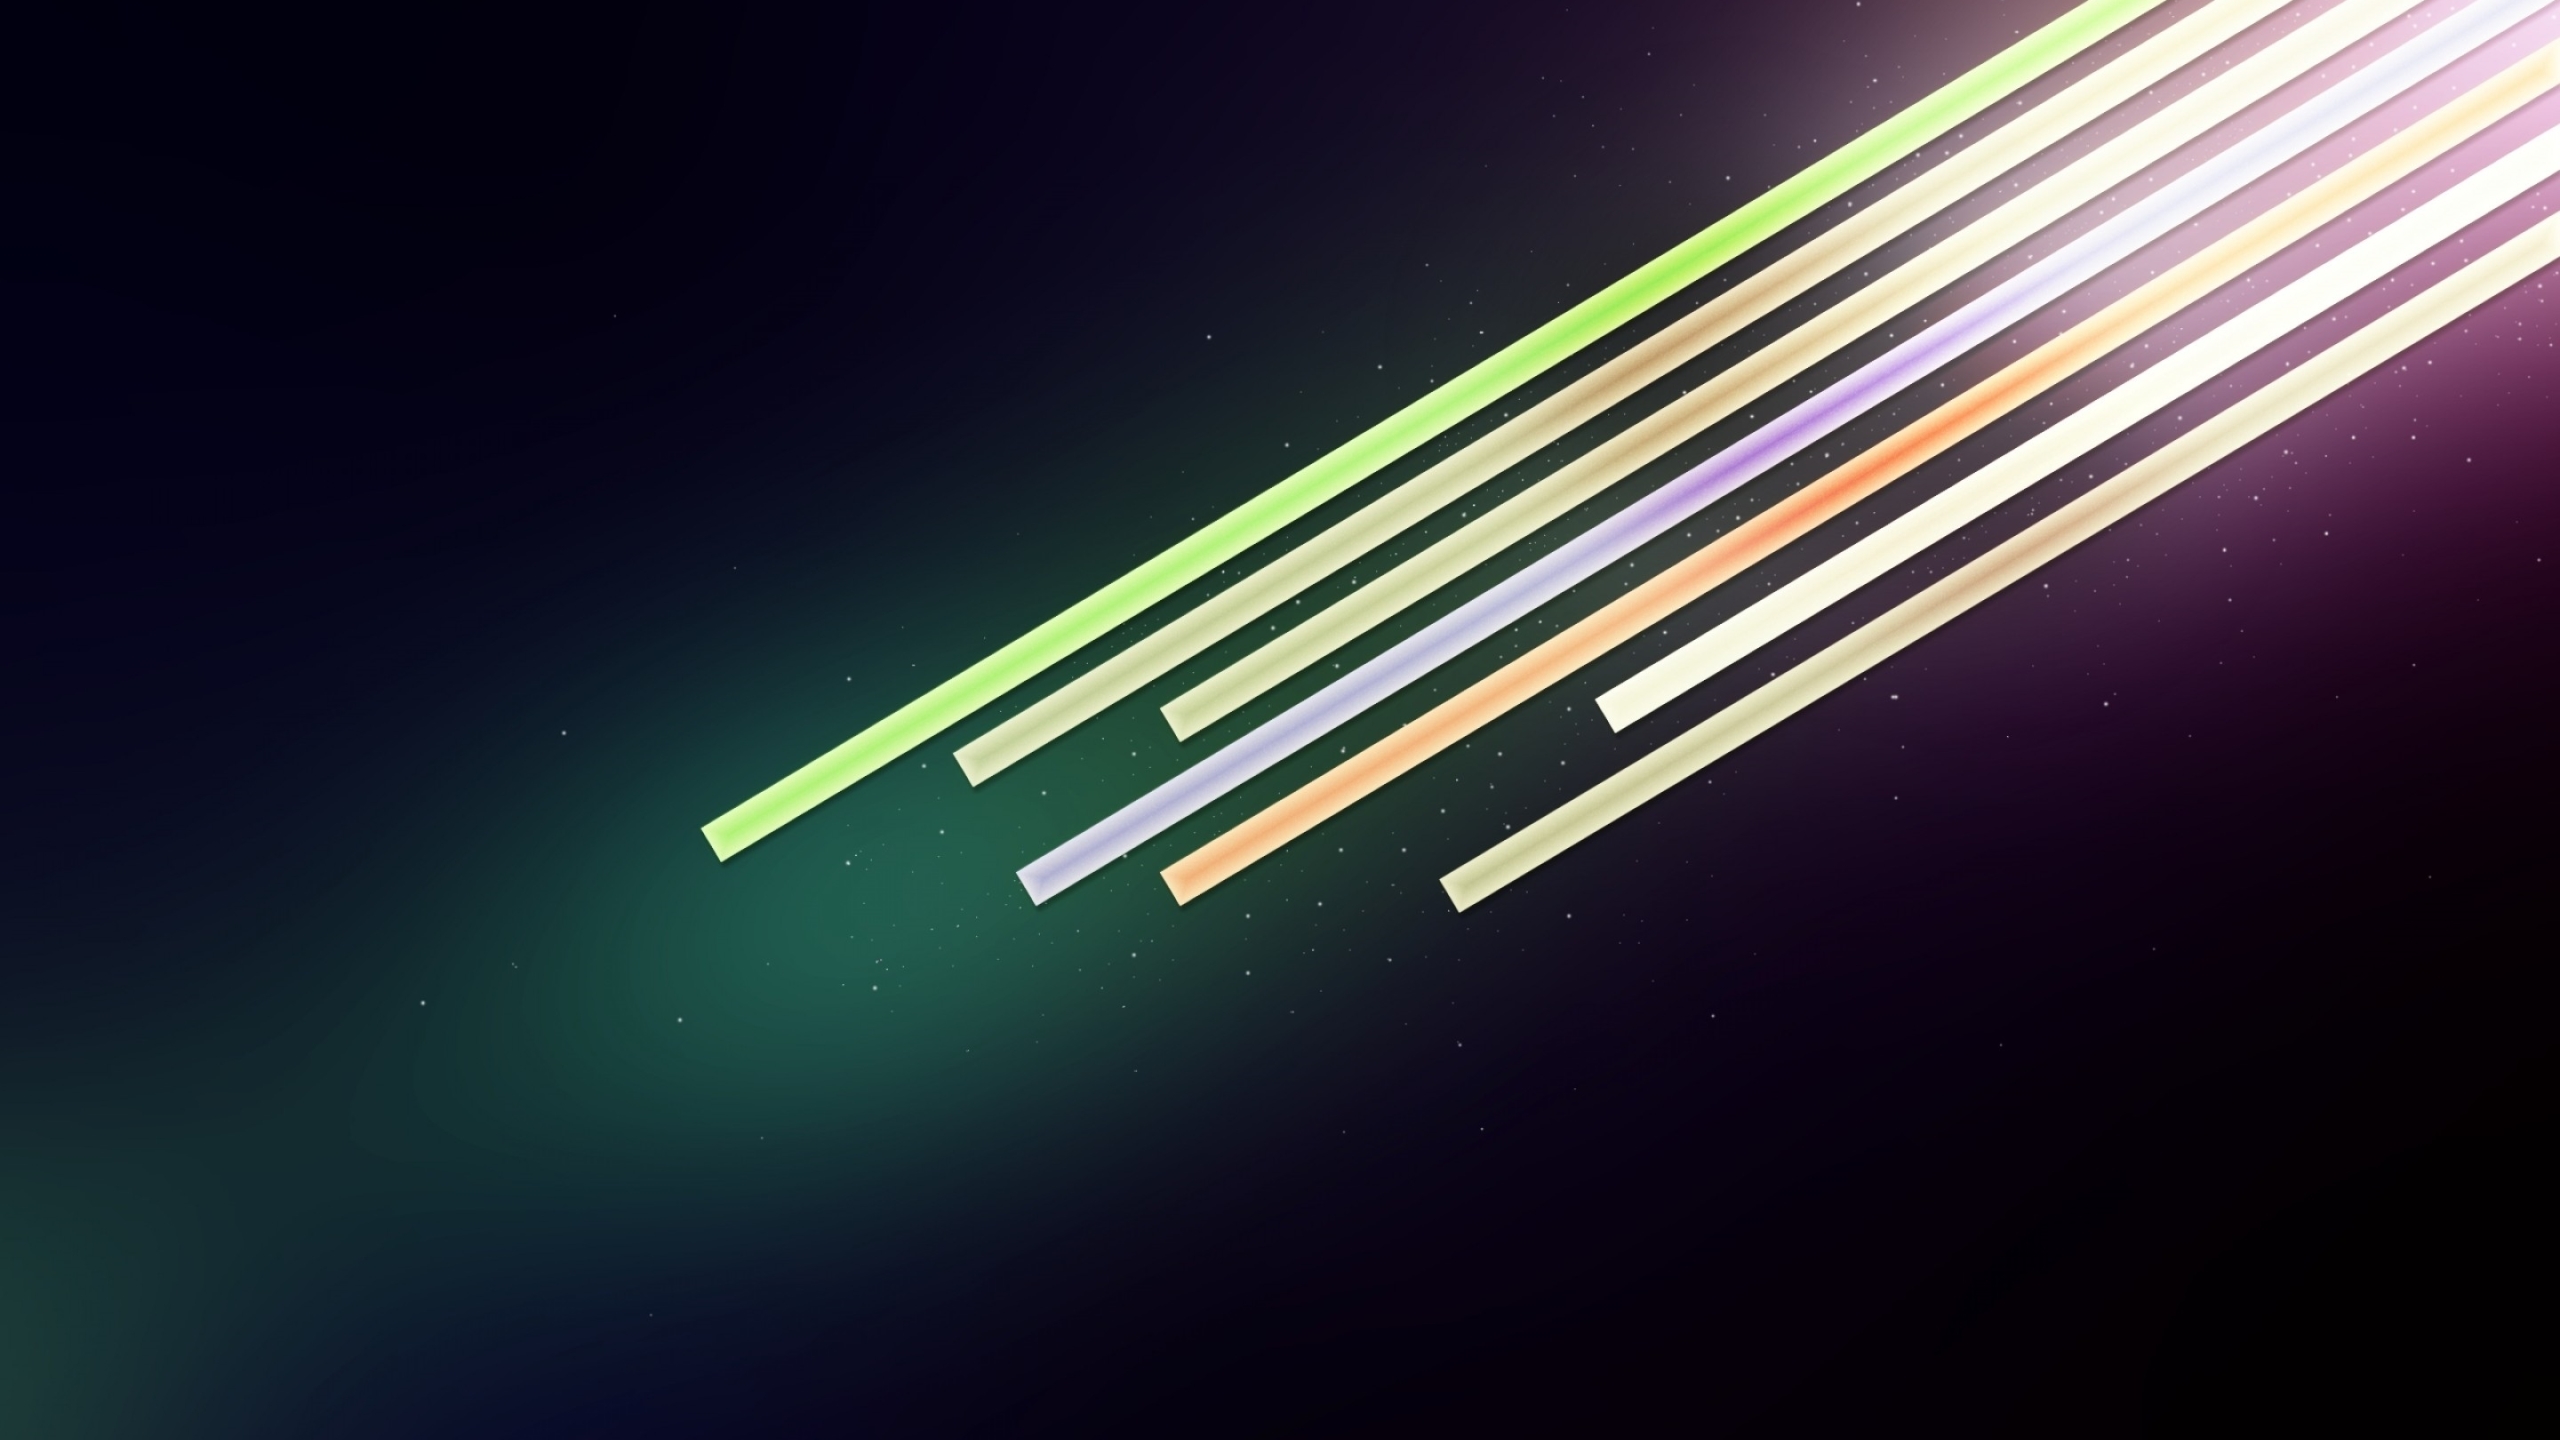 Background Simple Lines Mac Wallpaper